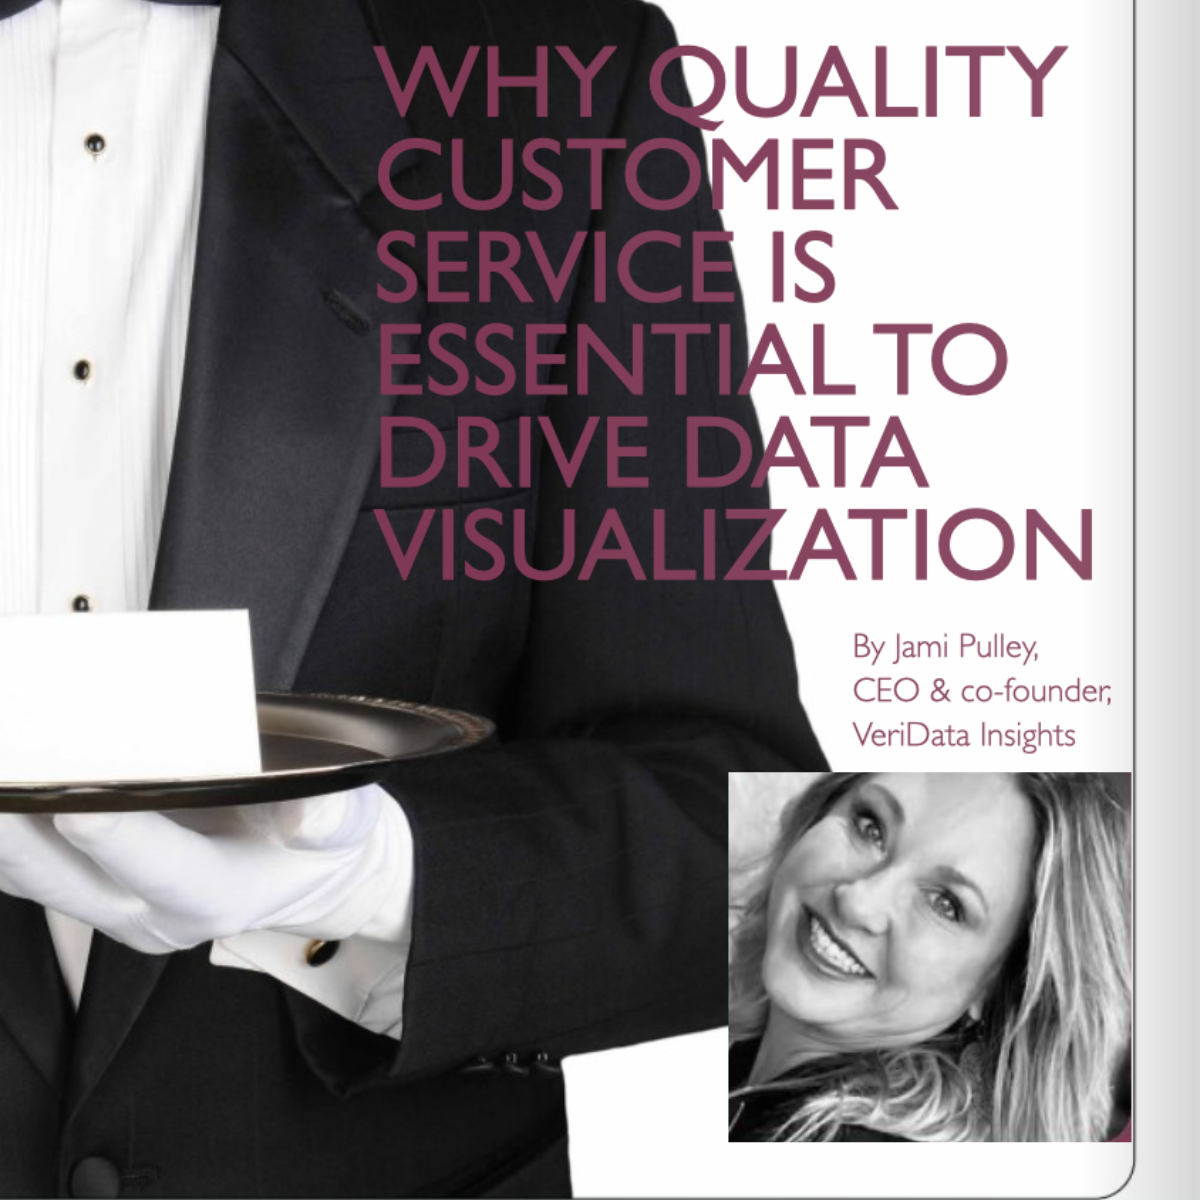 Why Quality Customer Service is Essential to Drive Data Visualization